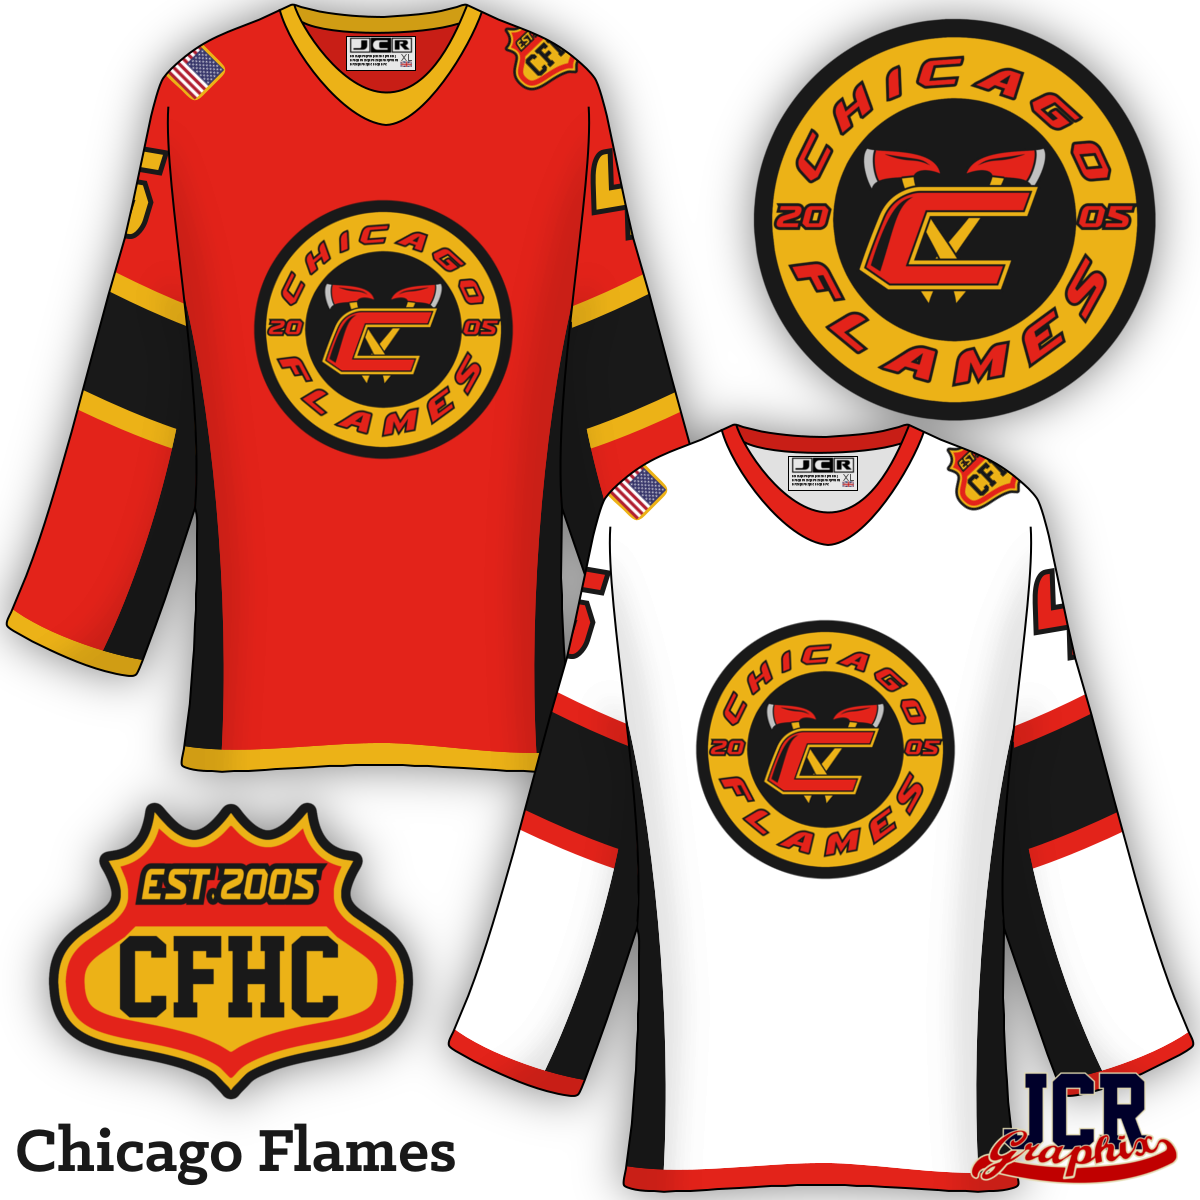 Calgary Flames-unused C revisited - Concepts - Chris Creamer's Sports Logos  Community - CCSLC - SportsLogos.Net Forums